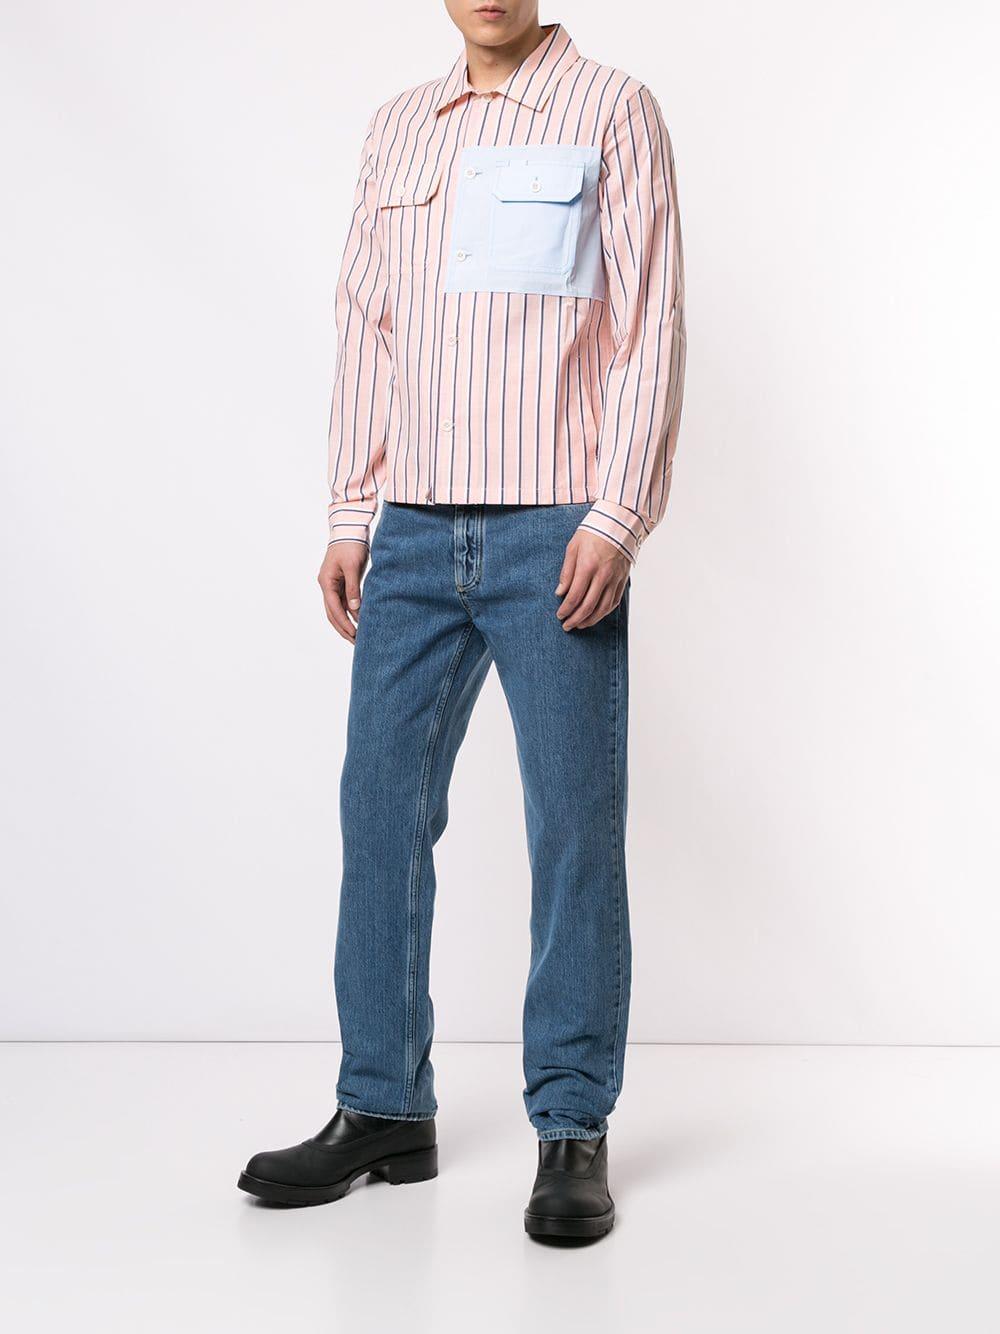 Maison Margiela Cotton Striped Patch Shirt in Pink for Men - Lyst